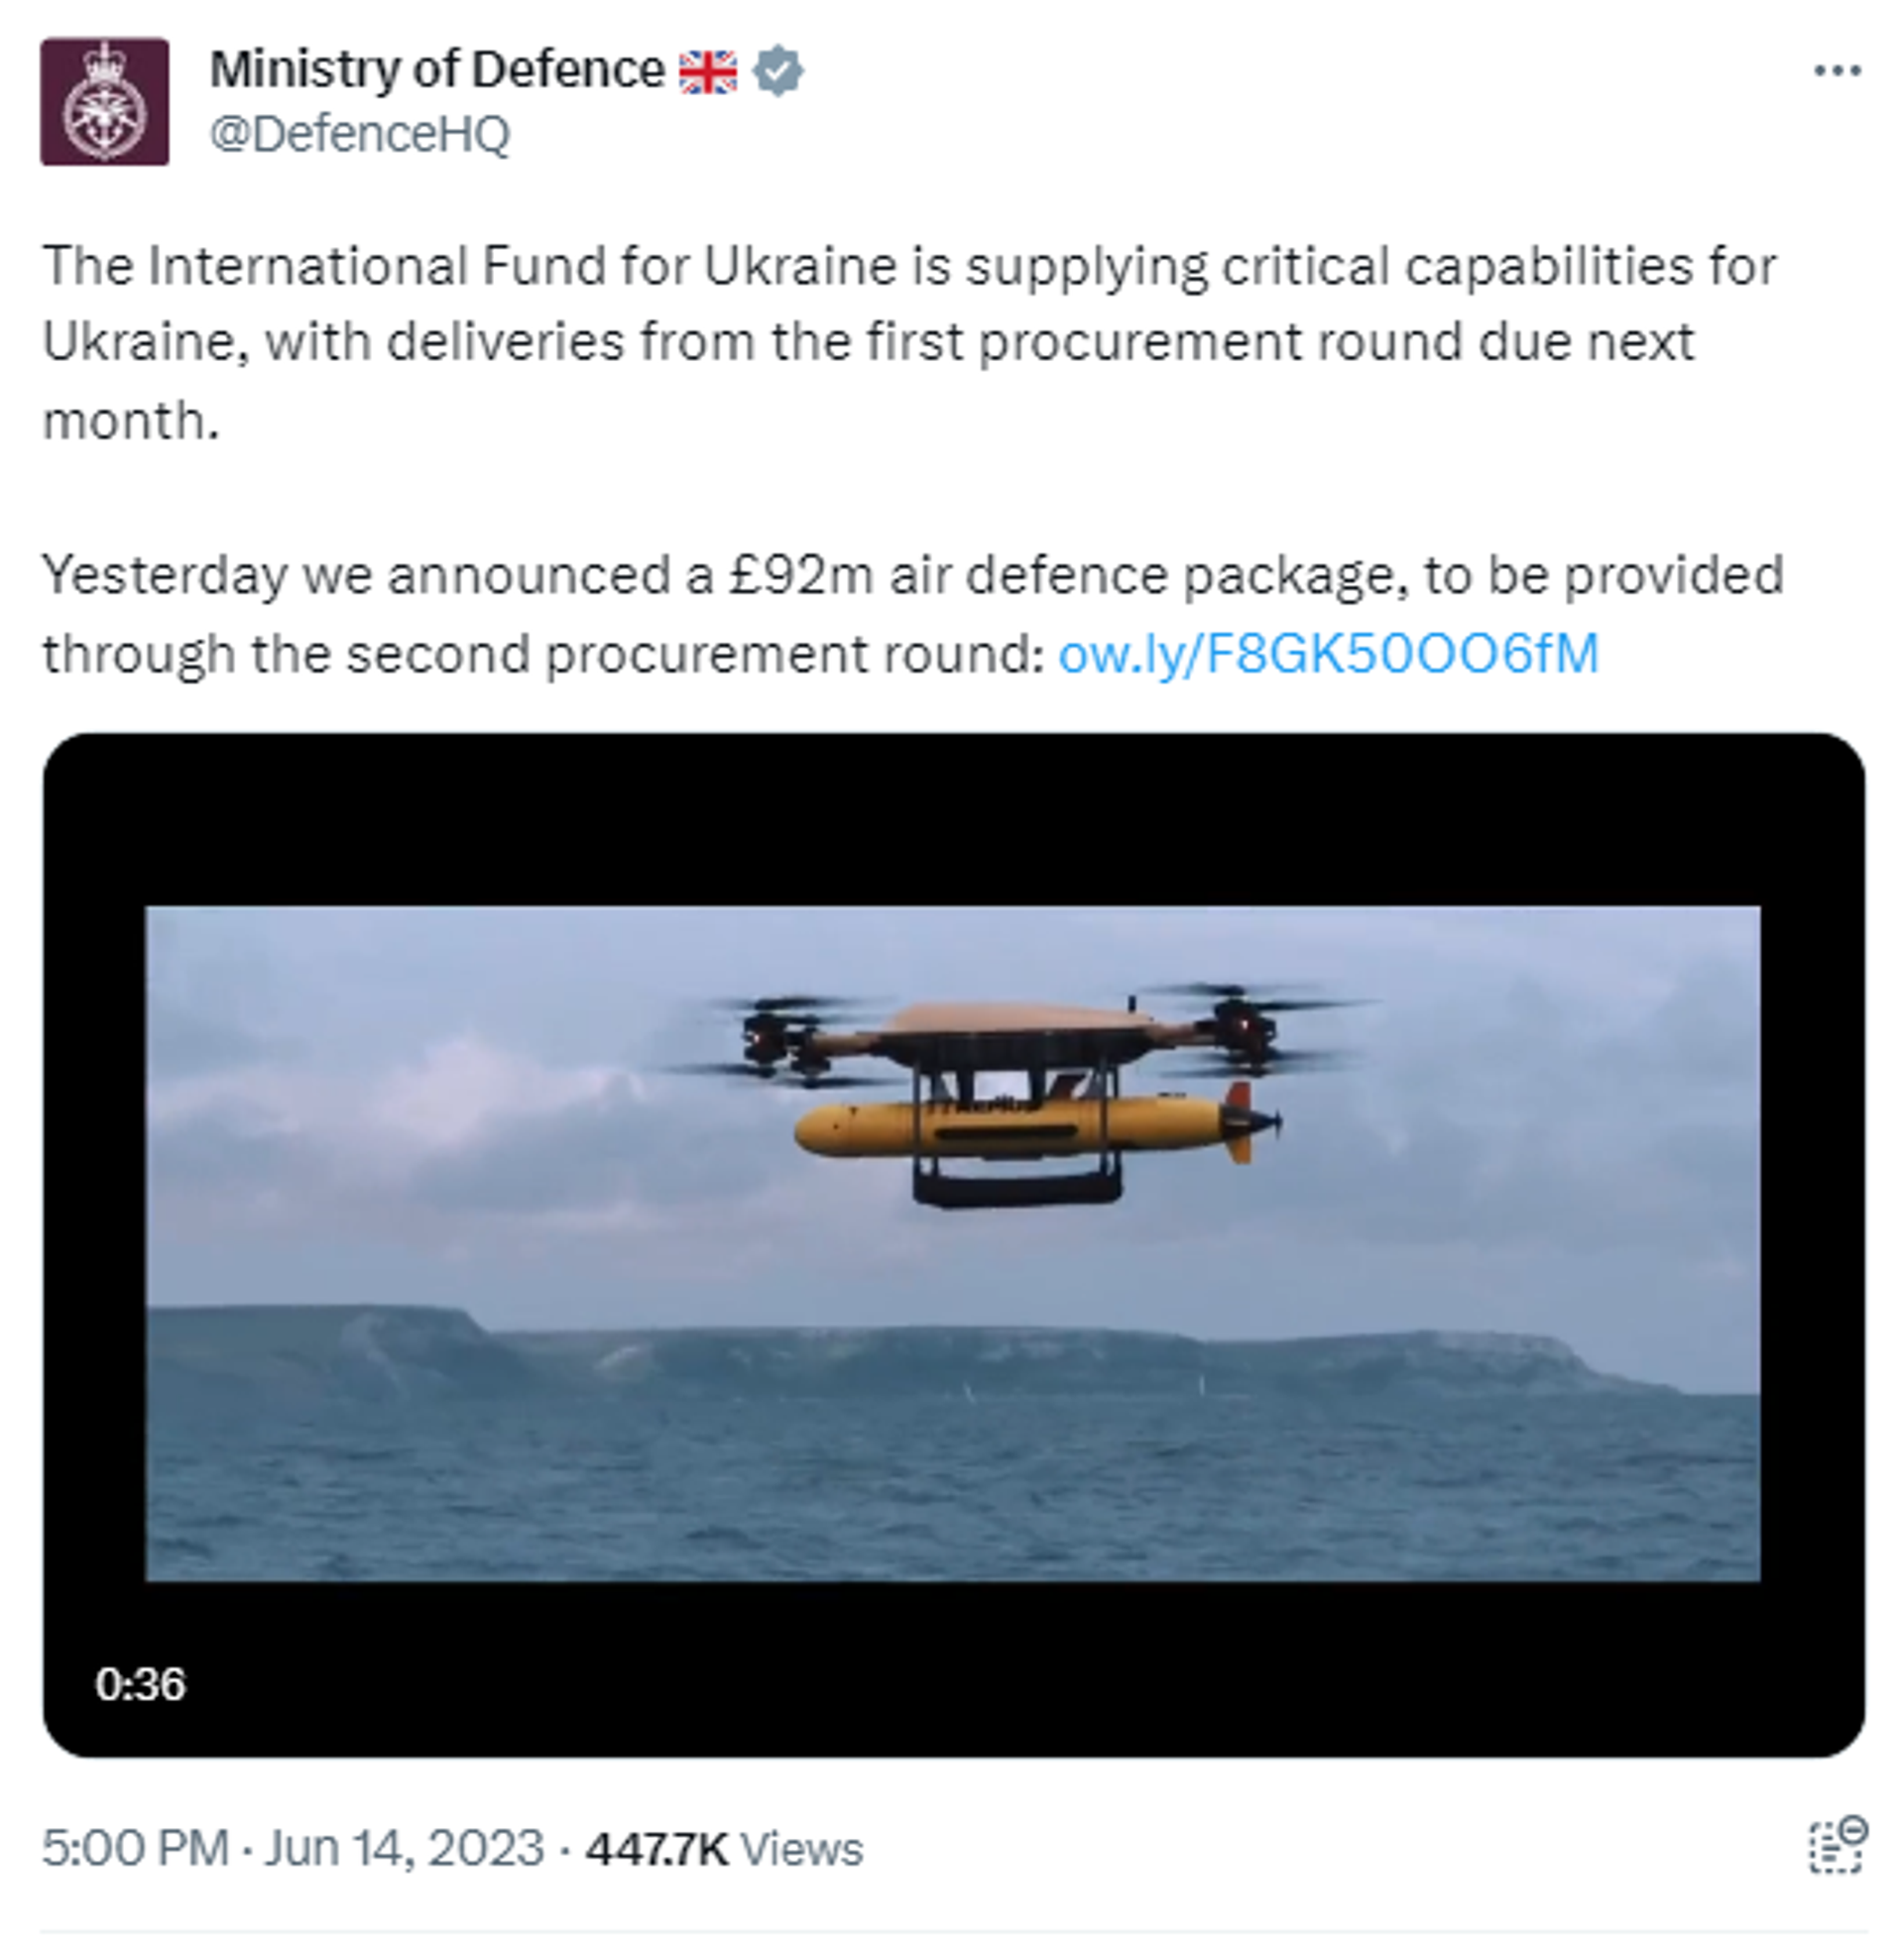 Screenshot of Twitter post by UK Ministry of Defense showing footage of drones to be supplied to Ukraine. - Sputnik International, 1920, 15.06.2023